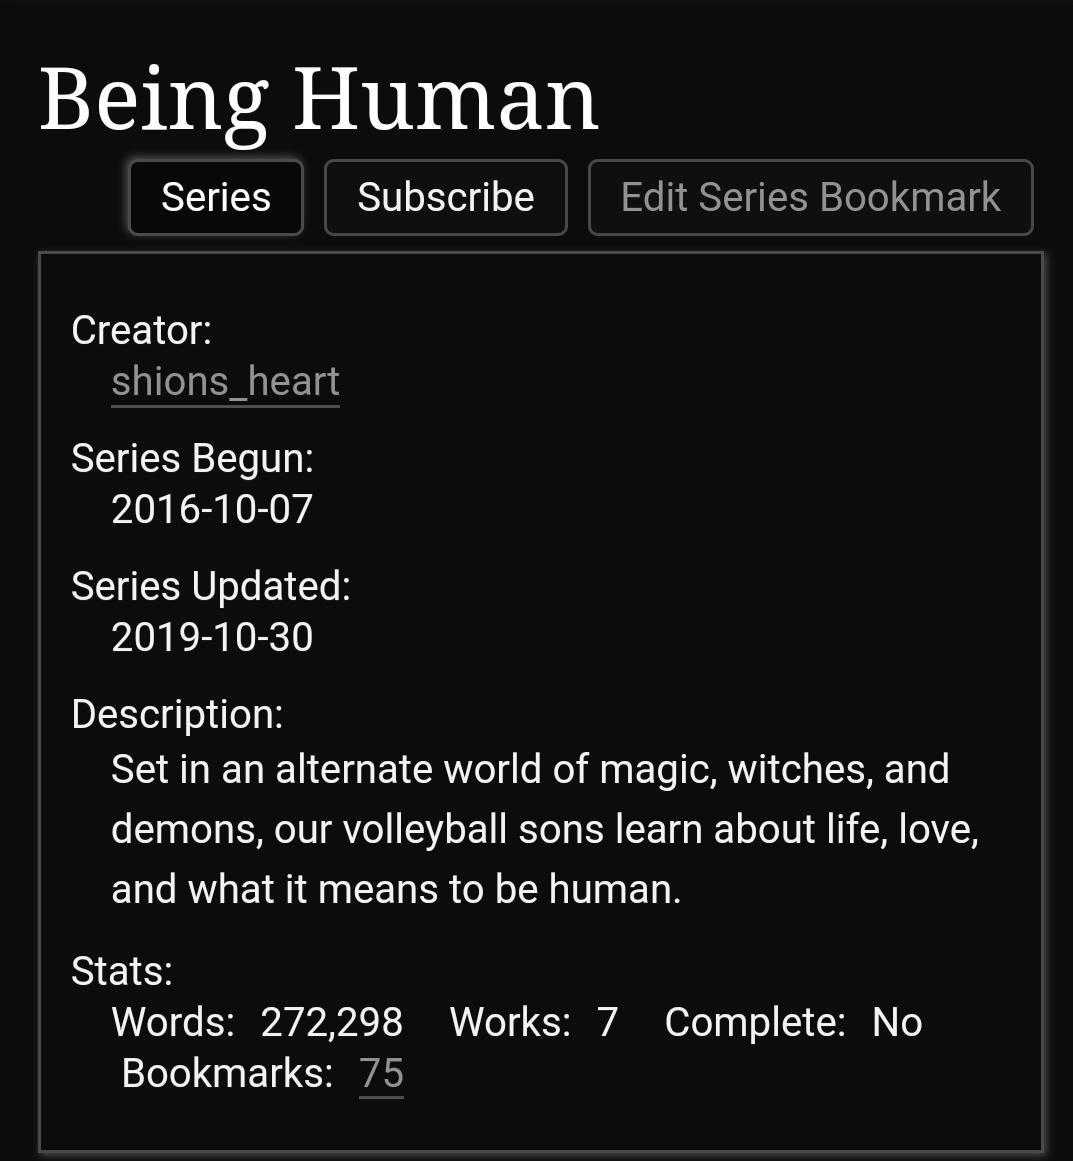 Being human series by shions_heart https://archiveofourown.org/series/660140 -7 works-lots of ships in every story-so so good-magic and demons involved-every work by sy is so good please check her whole account